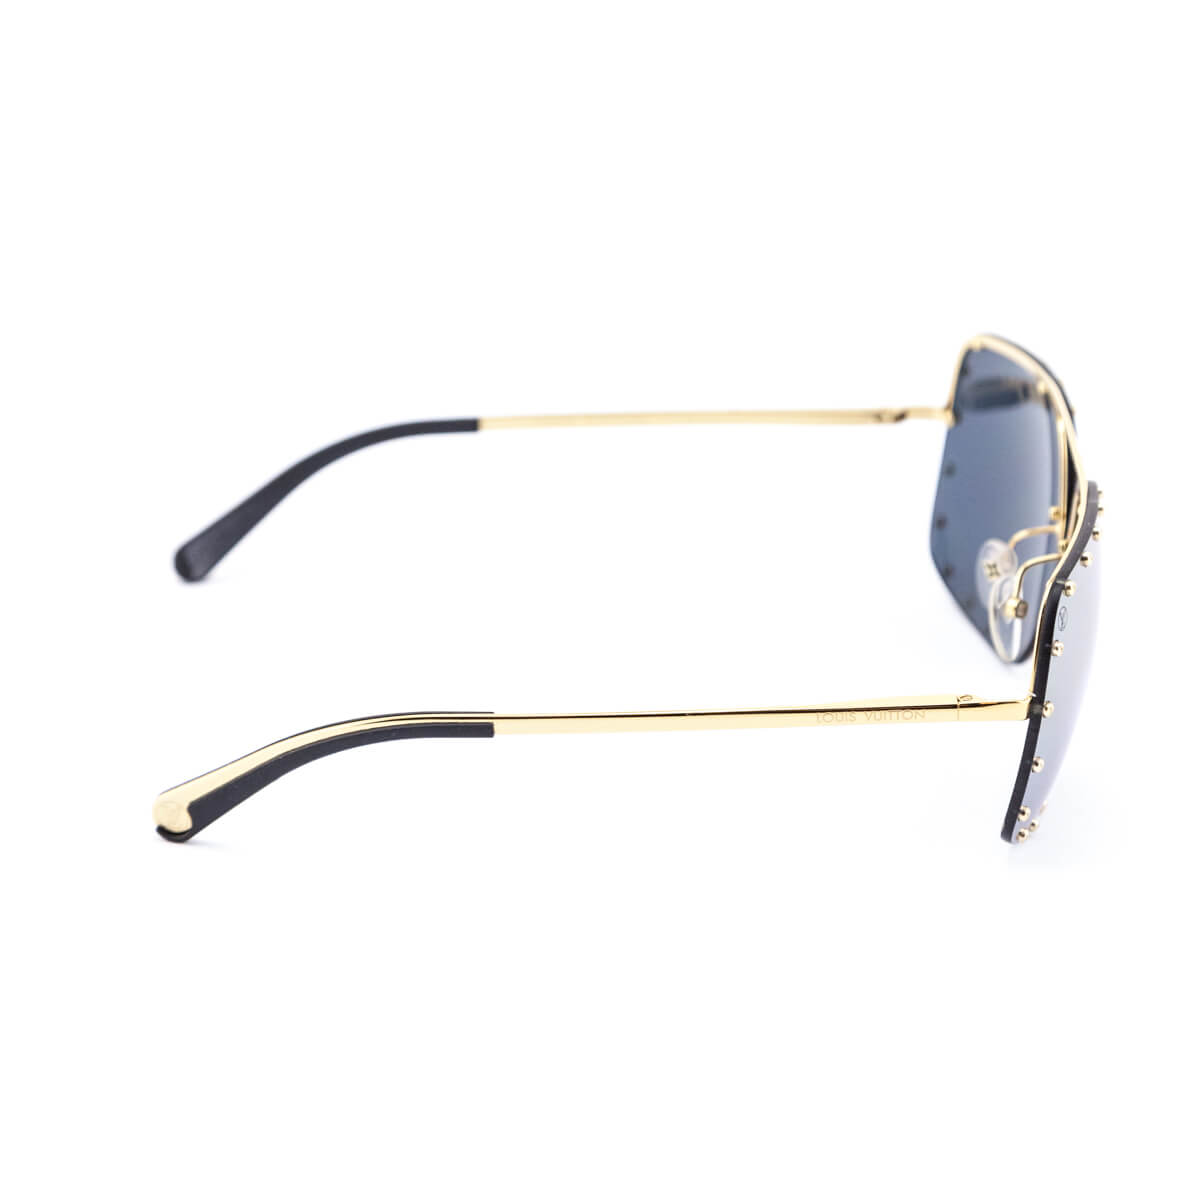 Pre-owned Louis Vuitton Silver & Gold Party Sunglasses